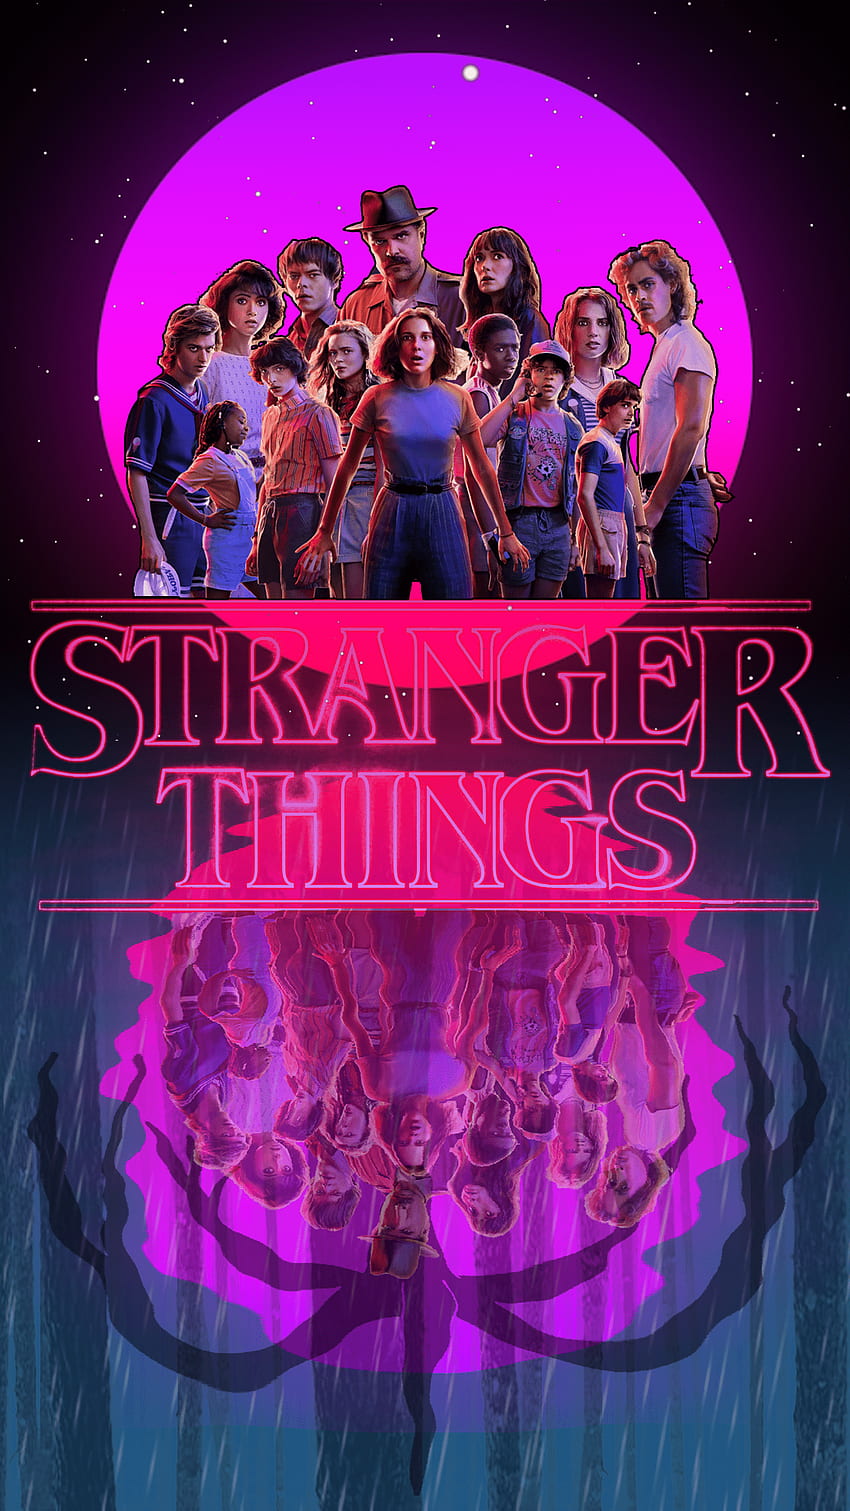 1366x768px, 720P Free download | Stranger things, pink, product HD ...